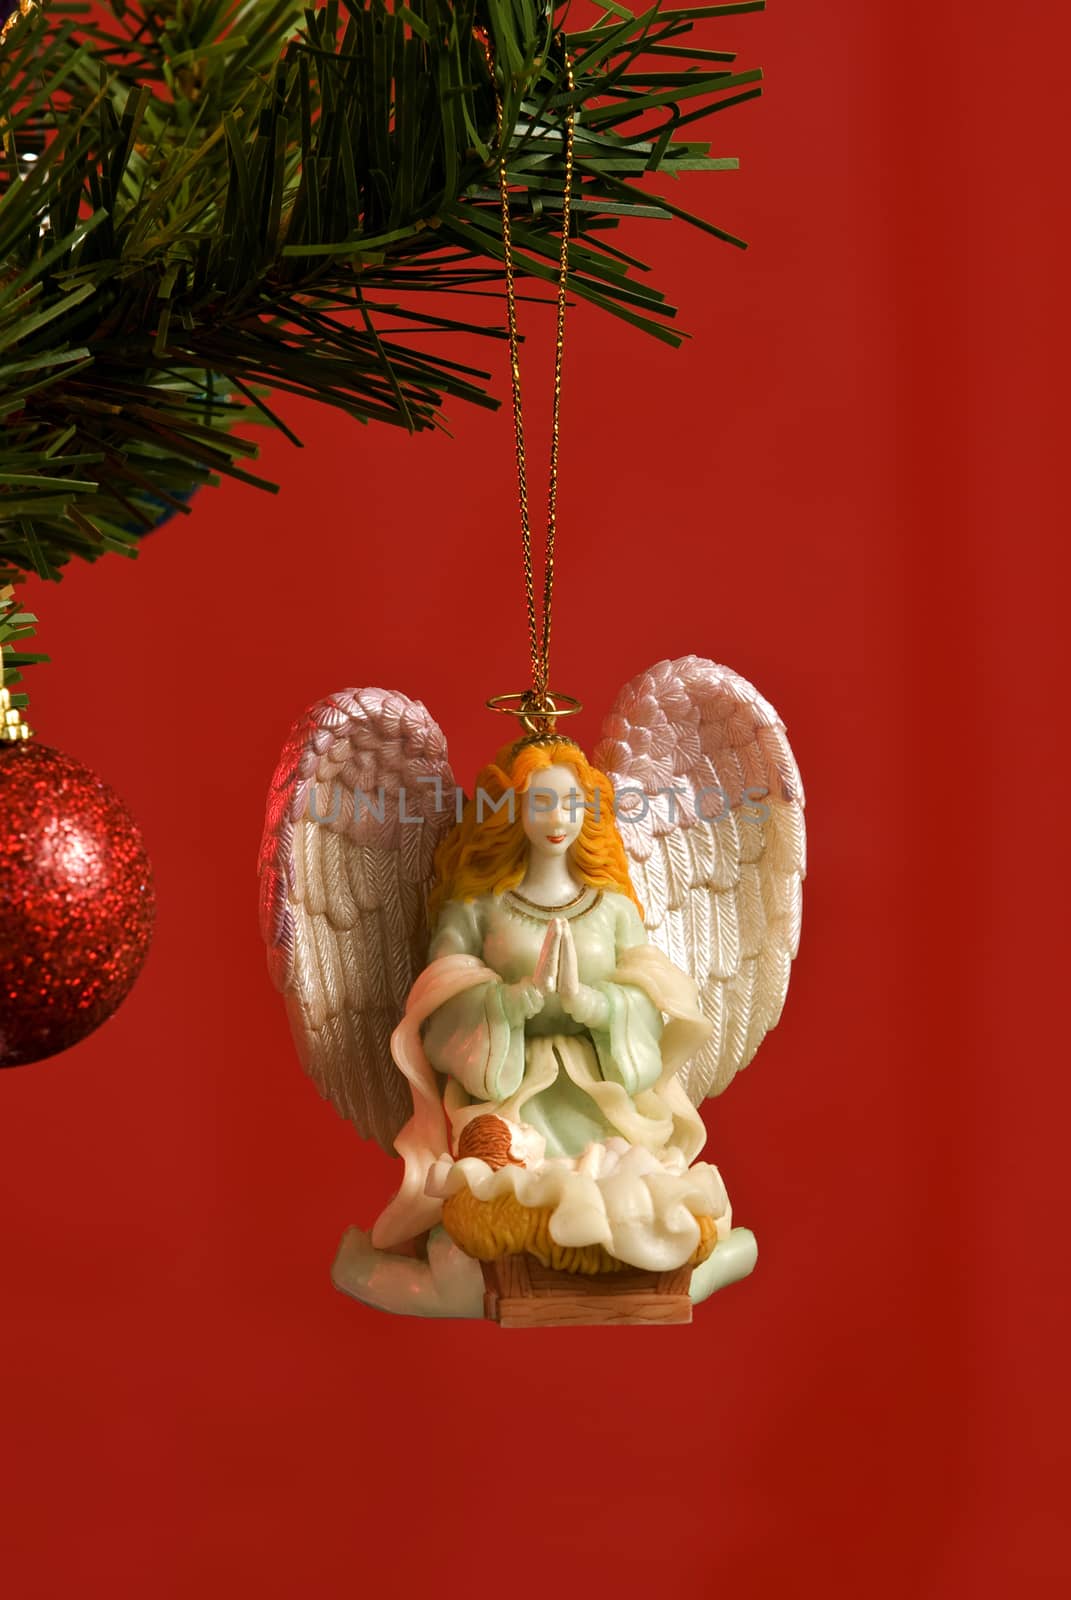 Vertical shot of a beautiful little angel ornament hanging on the Christmas tree shot on a red background.